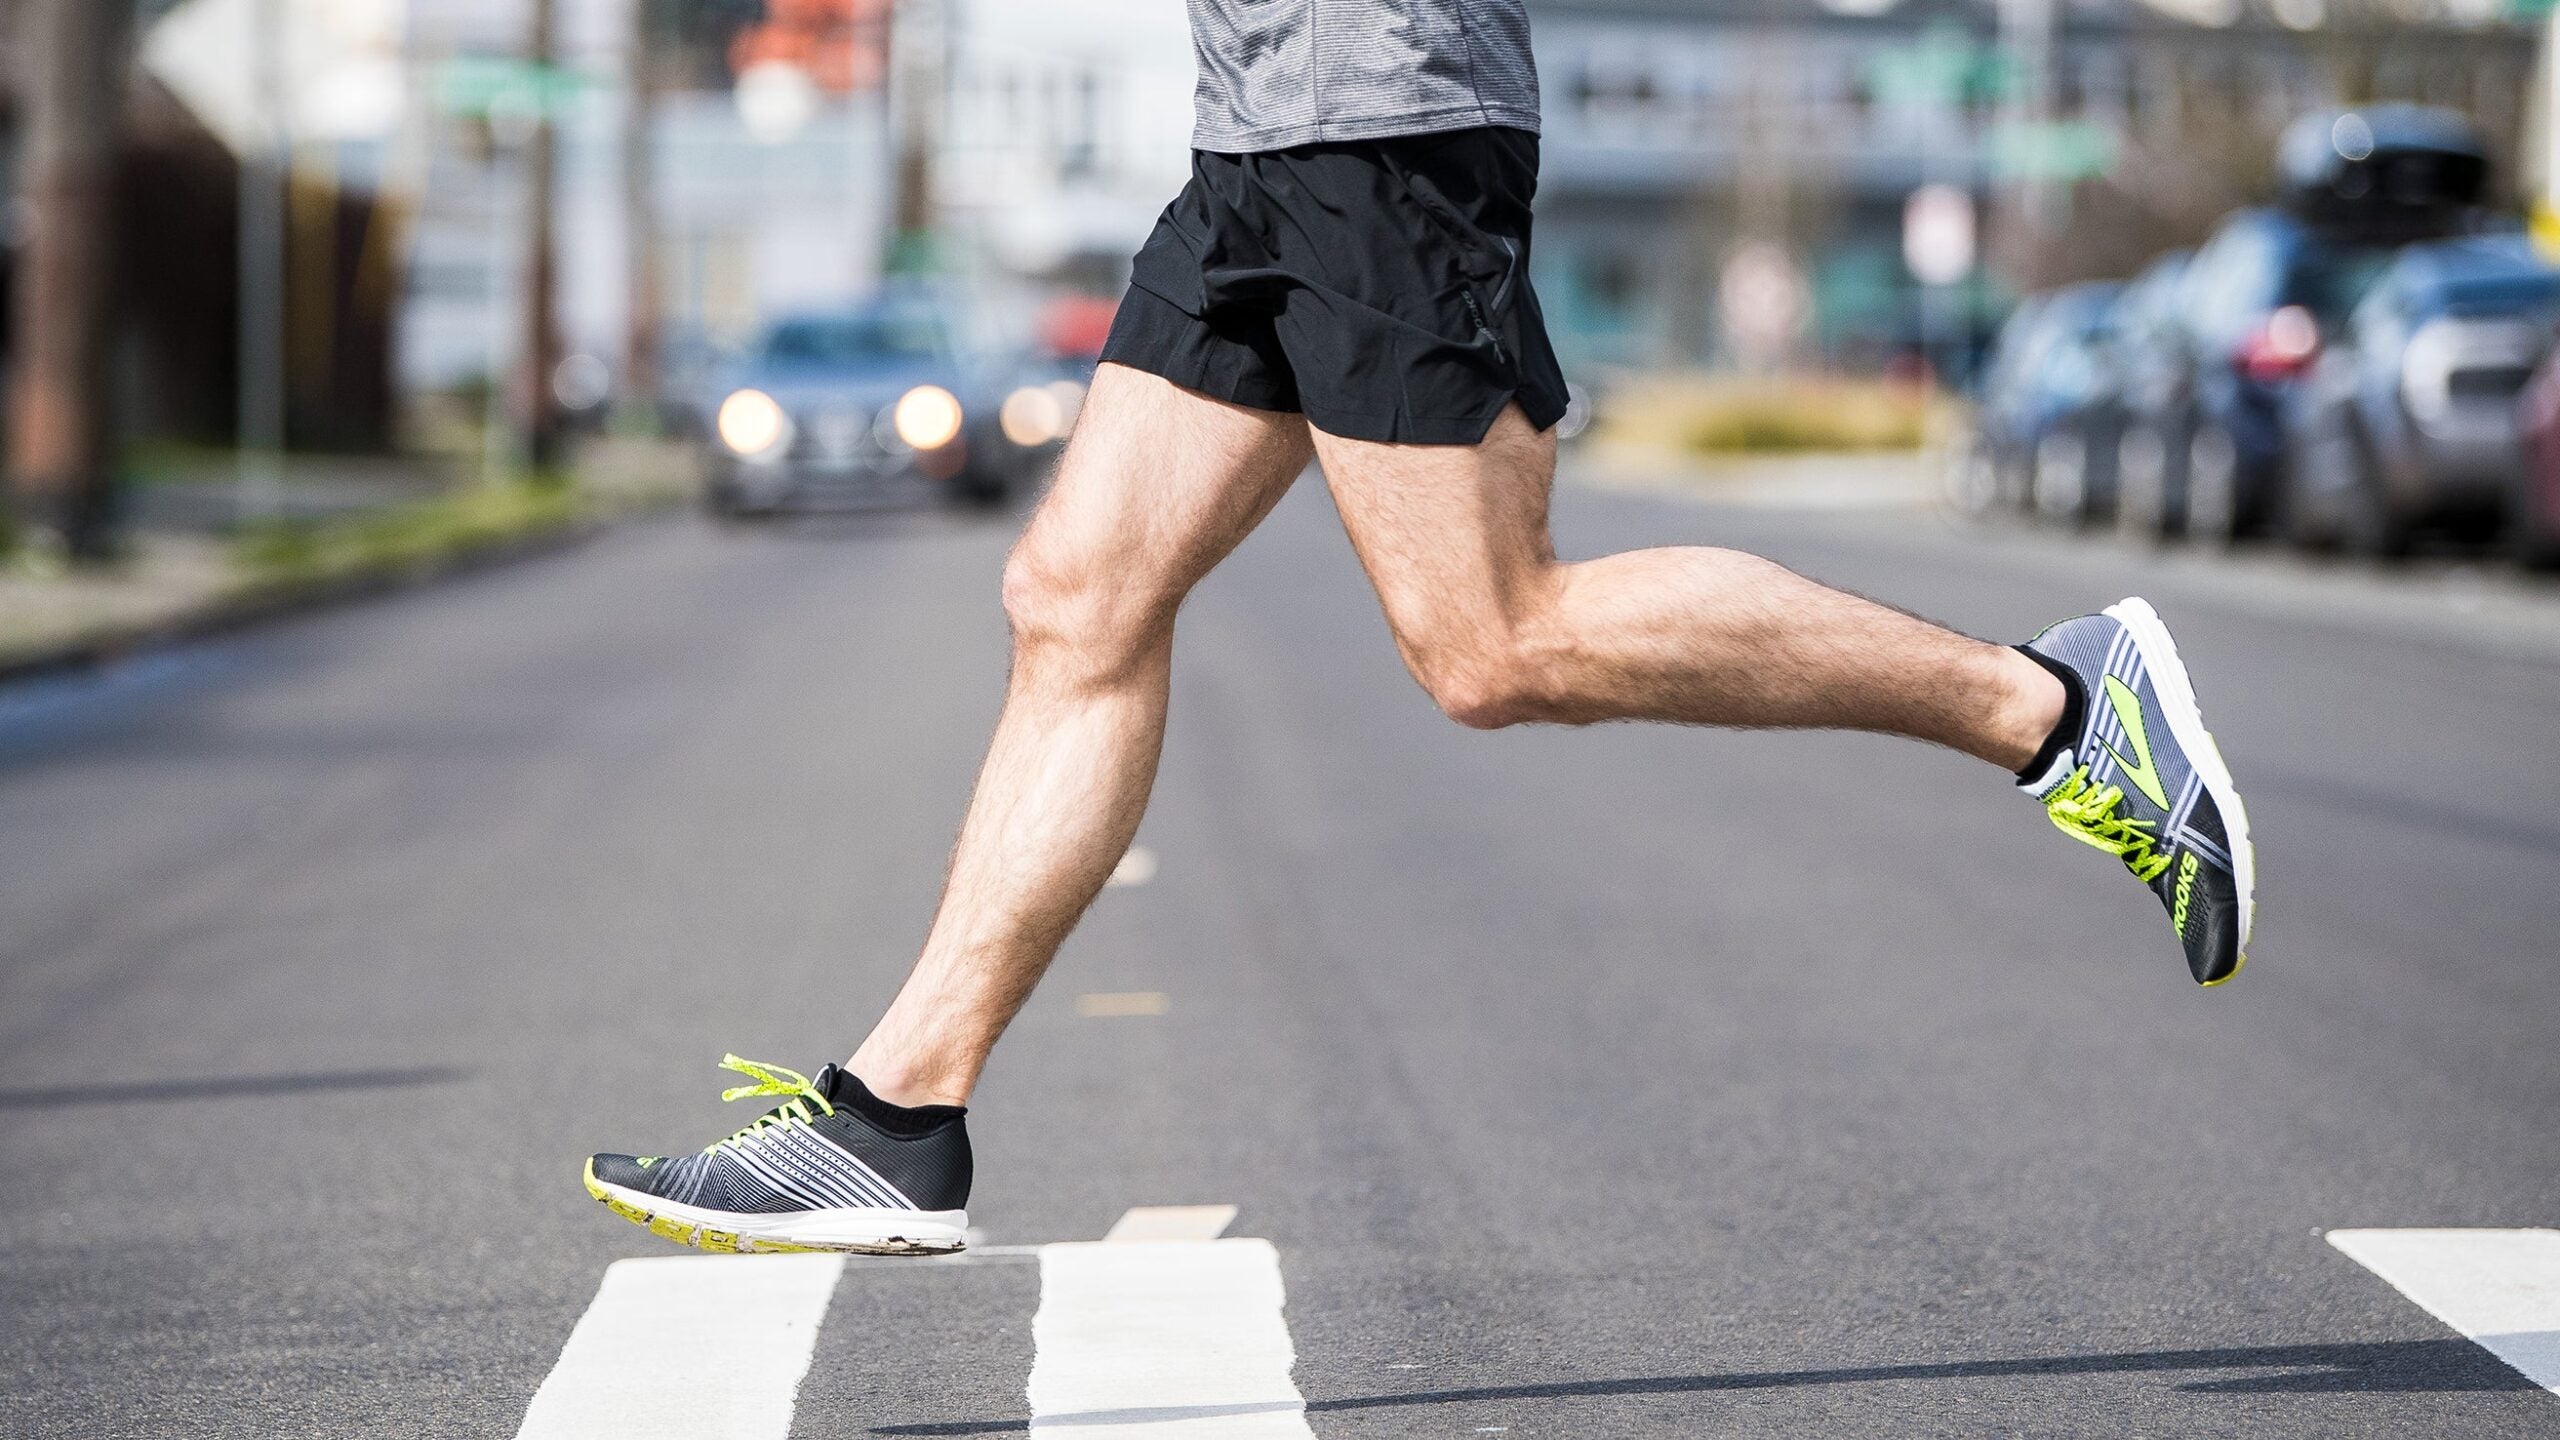 Racing Shoes: The Simplest Route to Speed